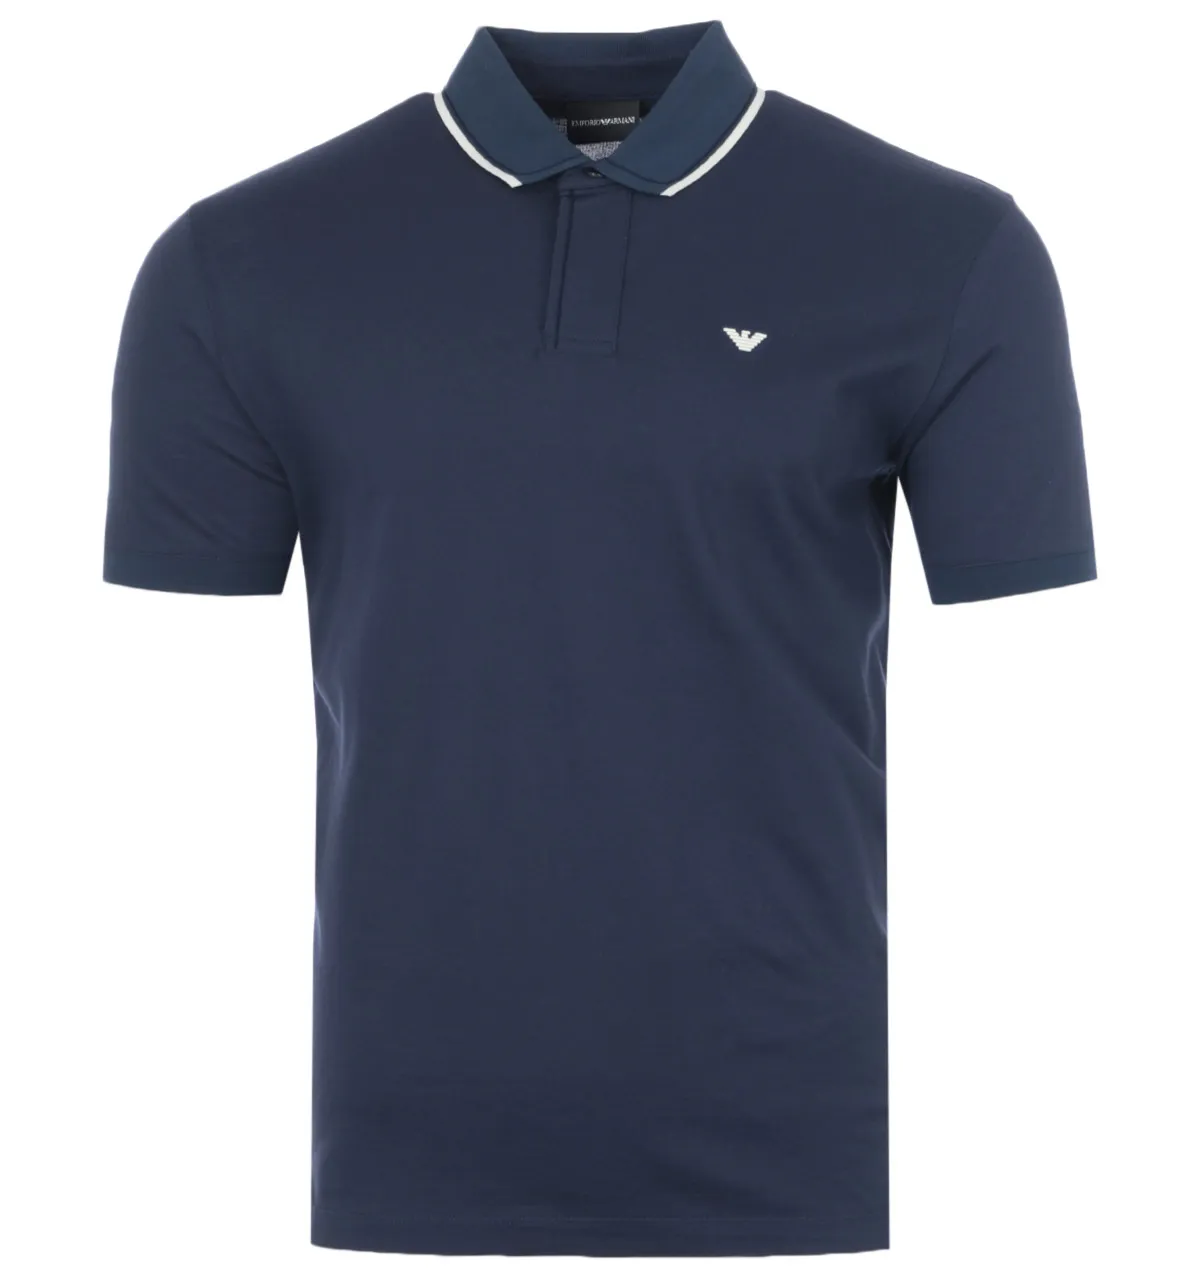 Emporio Armani | POLO T-SHIRT | TIPPING ON COLLER & SELEEVES | 100%  IMPORTED | FOR SUMMER | NAVY BLUE - Export Club